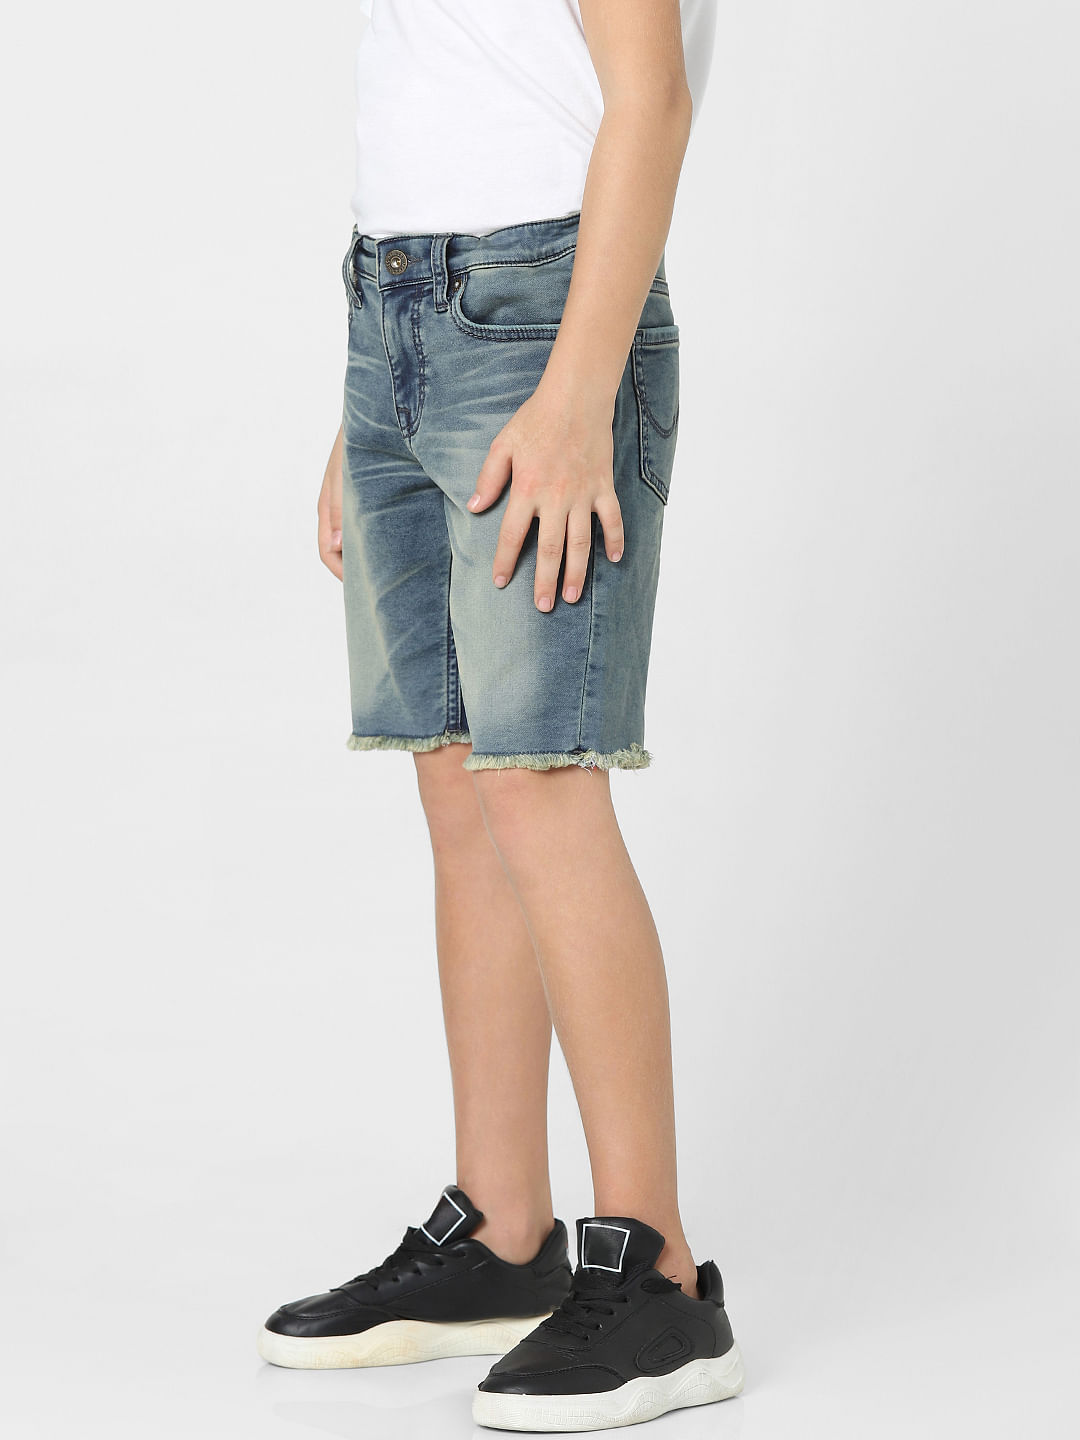 Mindae Shorts - Recycled Cotton Ripped Denim Shorts in Mid Blue Wash |  Showpo